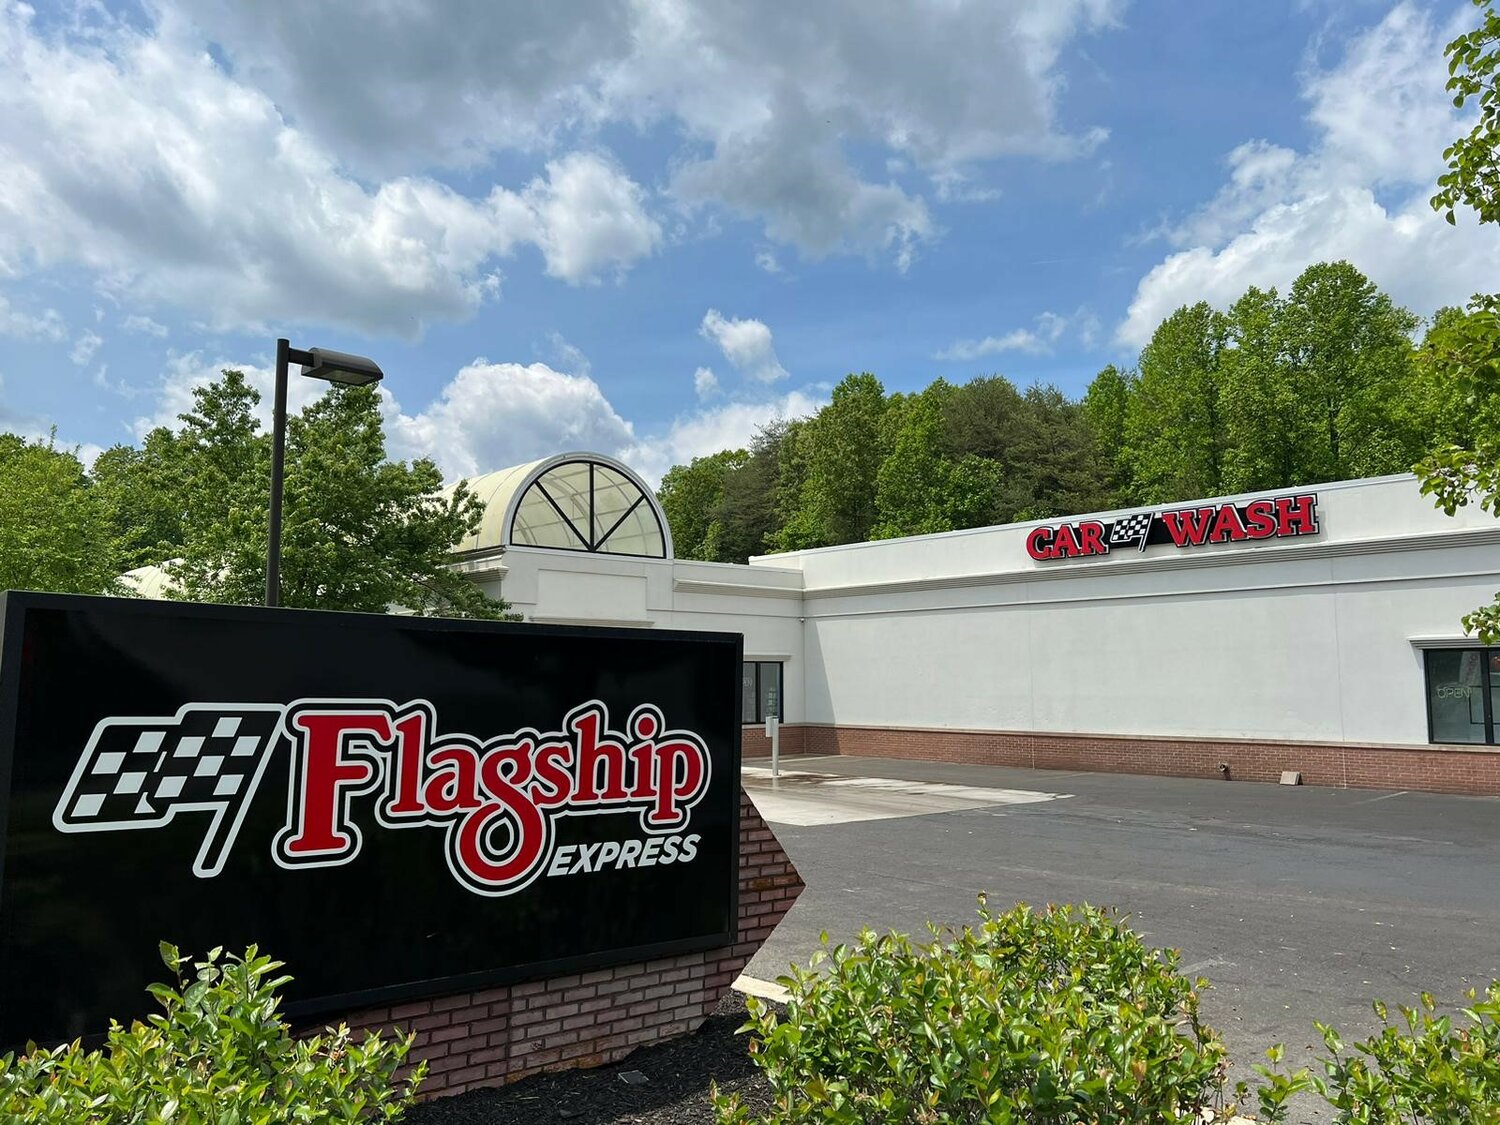 Flagship Carwash exterior sign at new Express location on Hoadly Road in Manassas, Virginia.